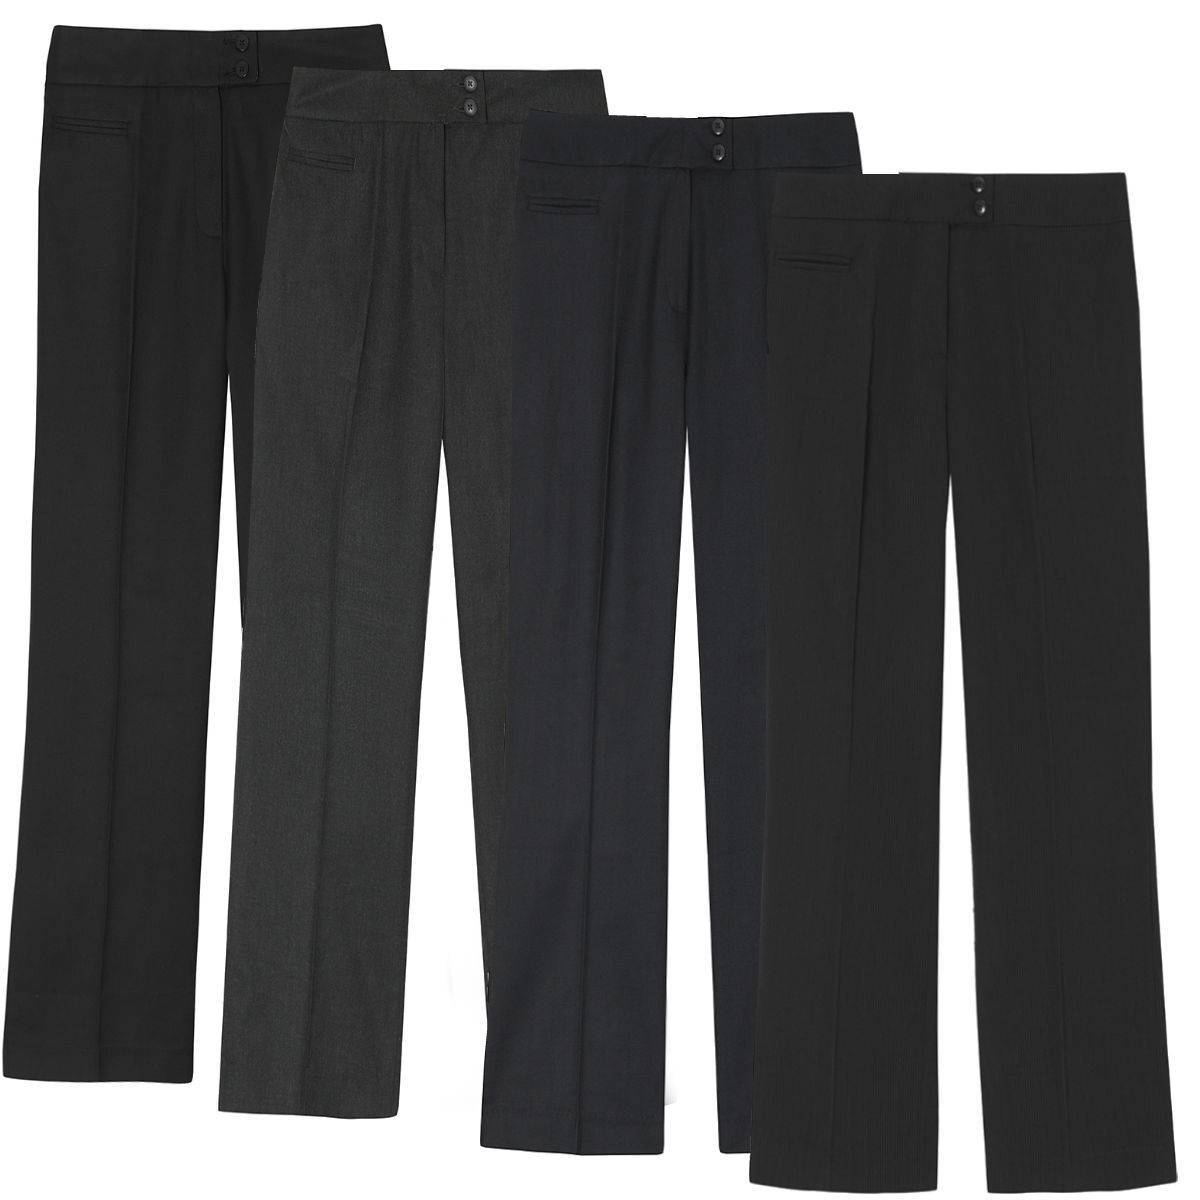 Ladies Plus Size Straight Leg Work Trousers (Sizes 16-26) Formal Office ...